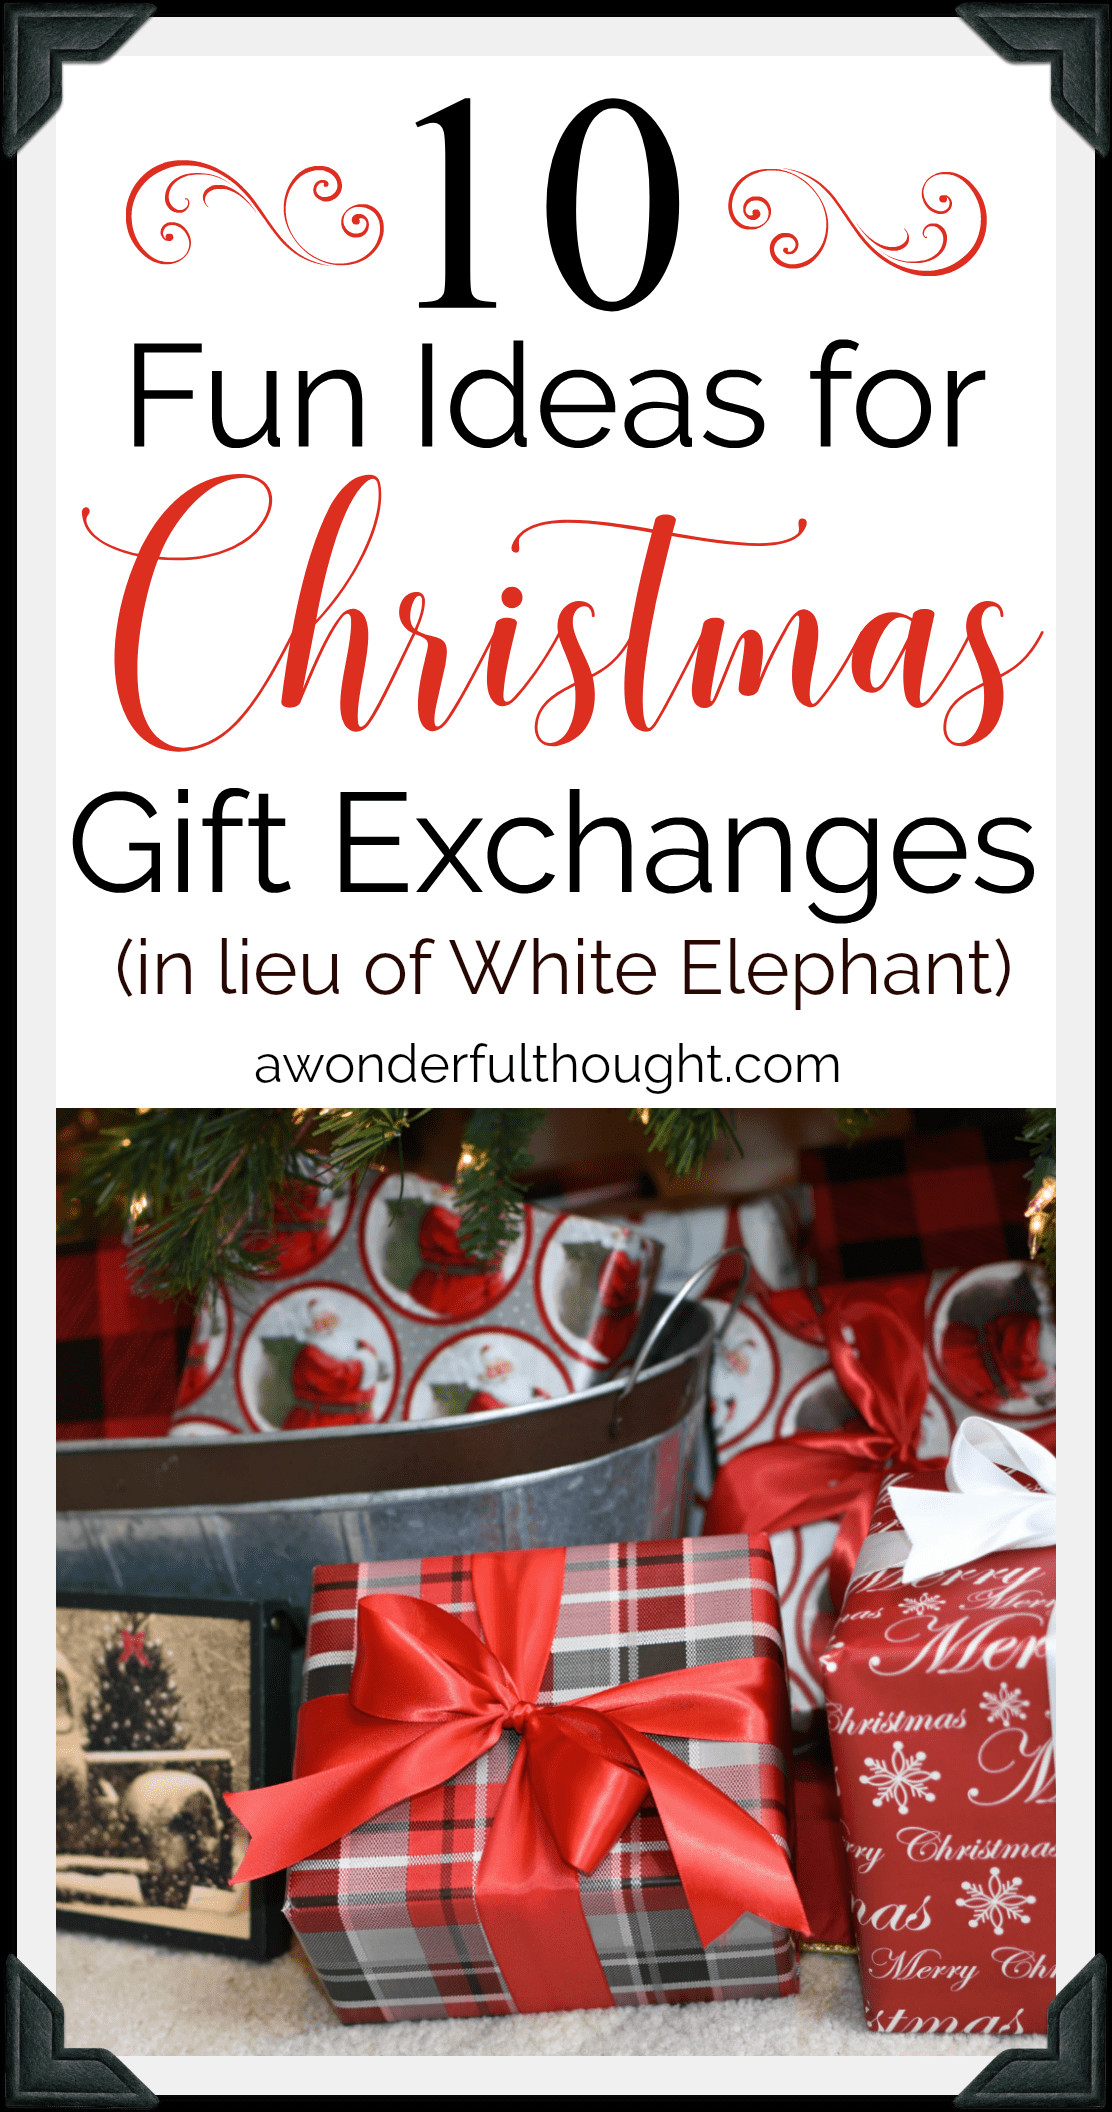 Christmas Party Gift Exchange Ideas
 Christmas Gift Exchange Ideas A Wonderful Thought